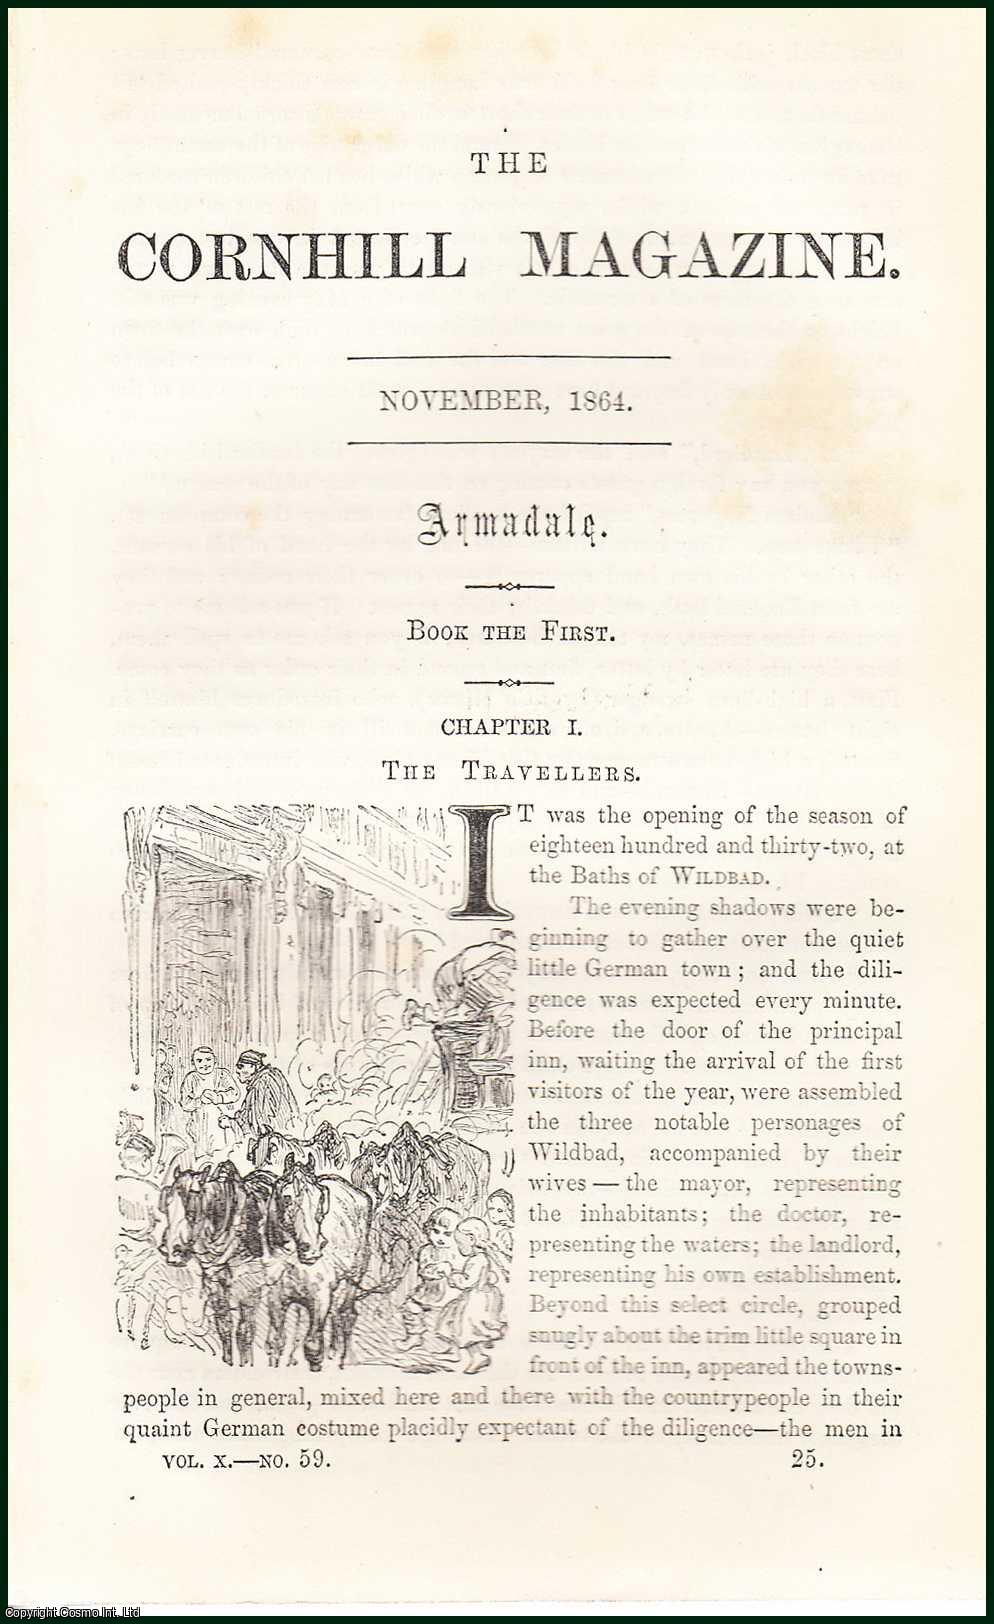 Wilkie Collins - The Travellers ; The Solid Side of The Scotch Character & The Wreck of The Timber-Ship. Armadale (Book I), by Wilkie Collins. An uncommon original article from the Cornhill Magazine, 1864.